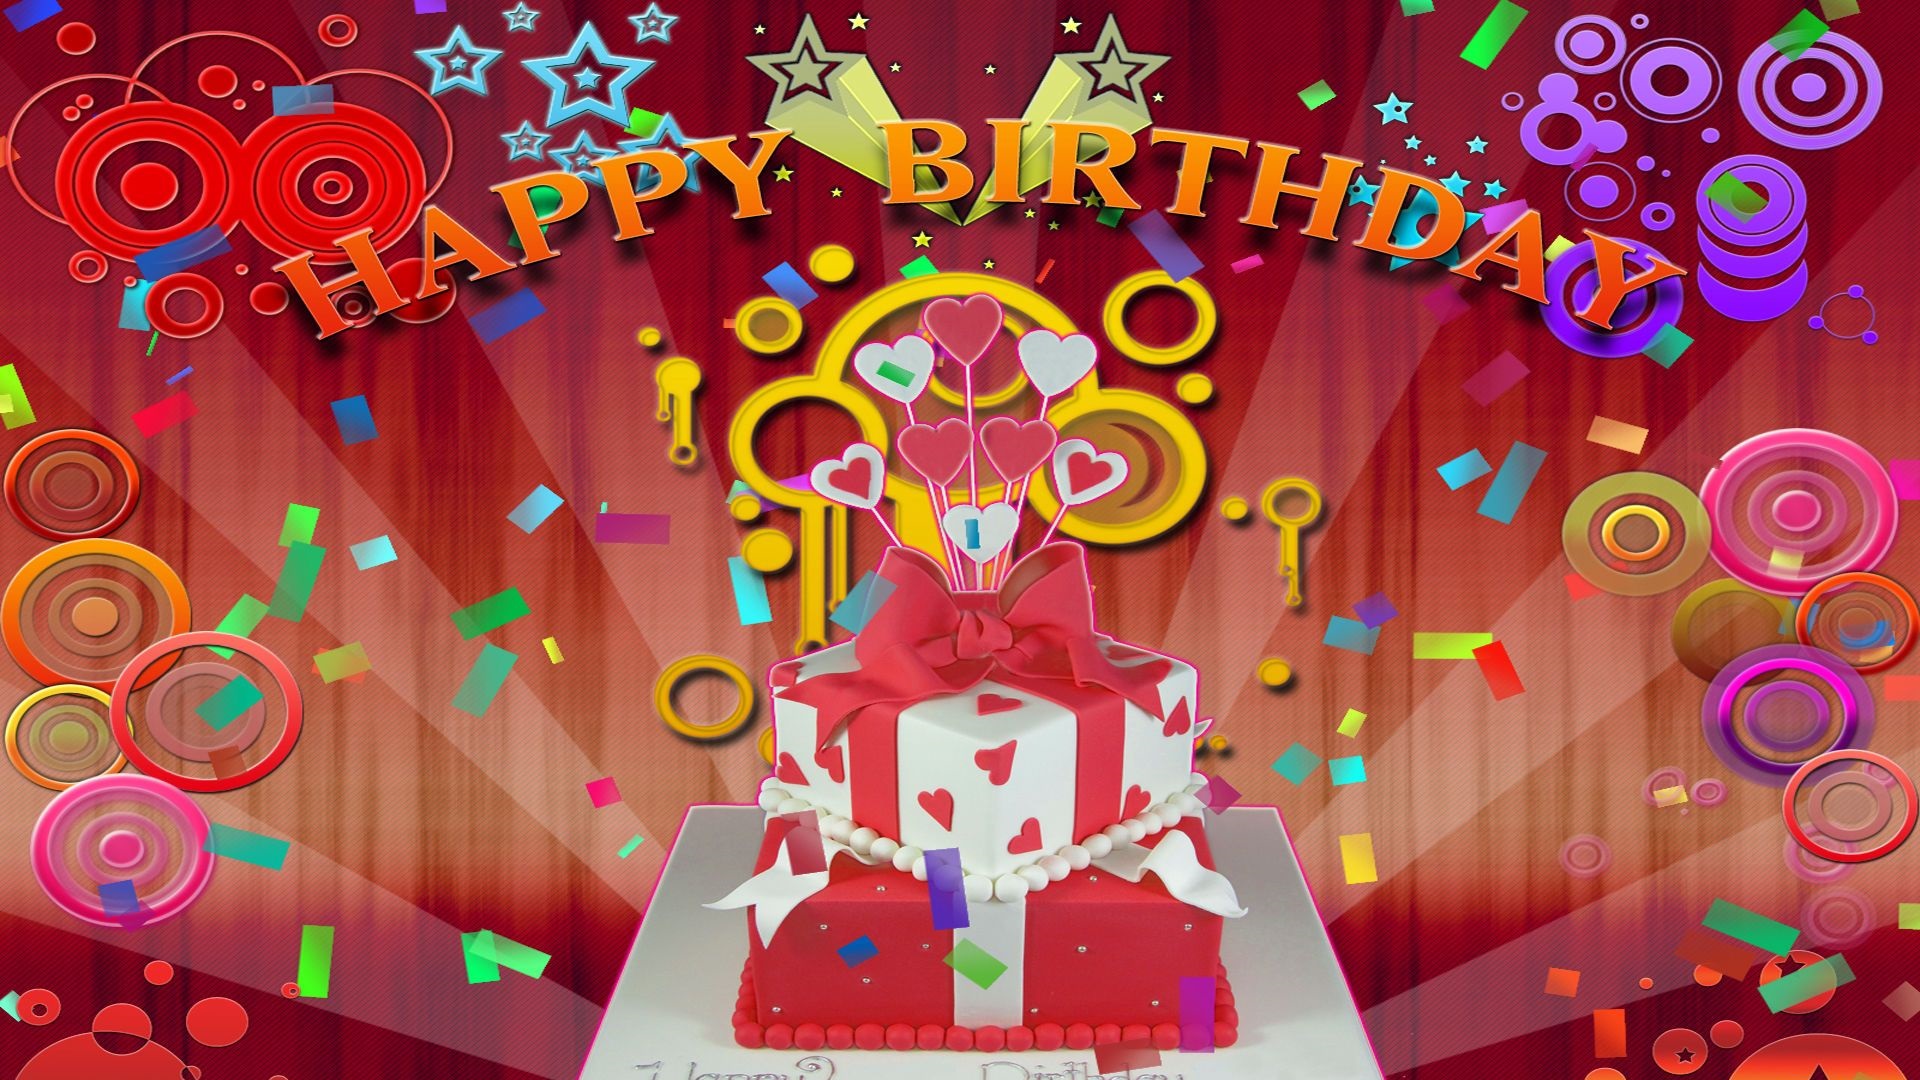 Birthday HD Backgrounds Free download 